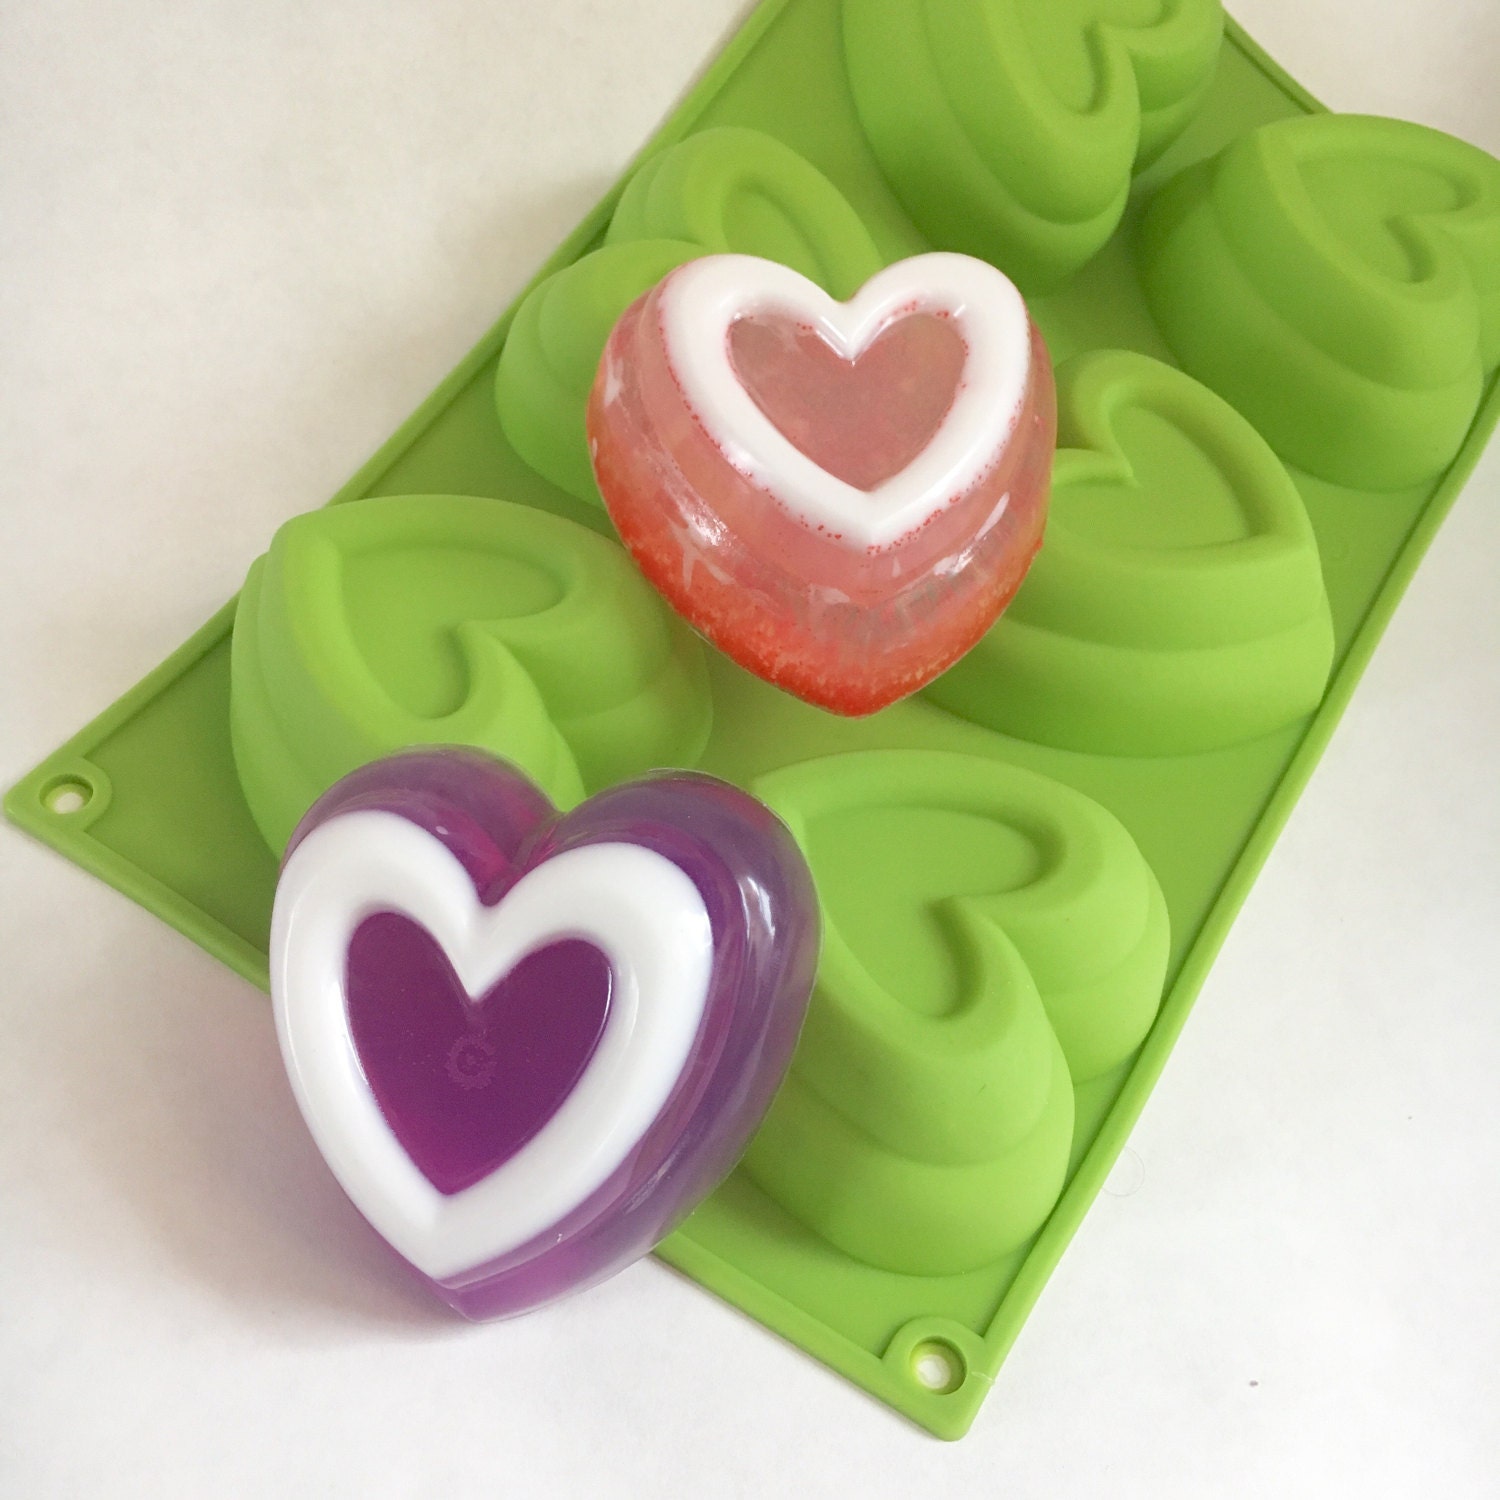 FRAMED HEART Soap Mold, Heat Safe Silicone, 6-4oz Cavities, DIY Soap, Free  Usa Ship, Two Wild Hares